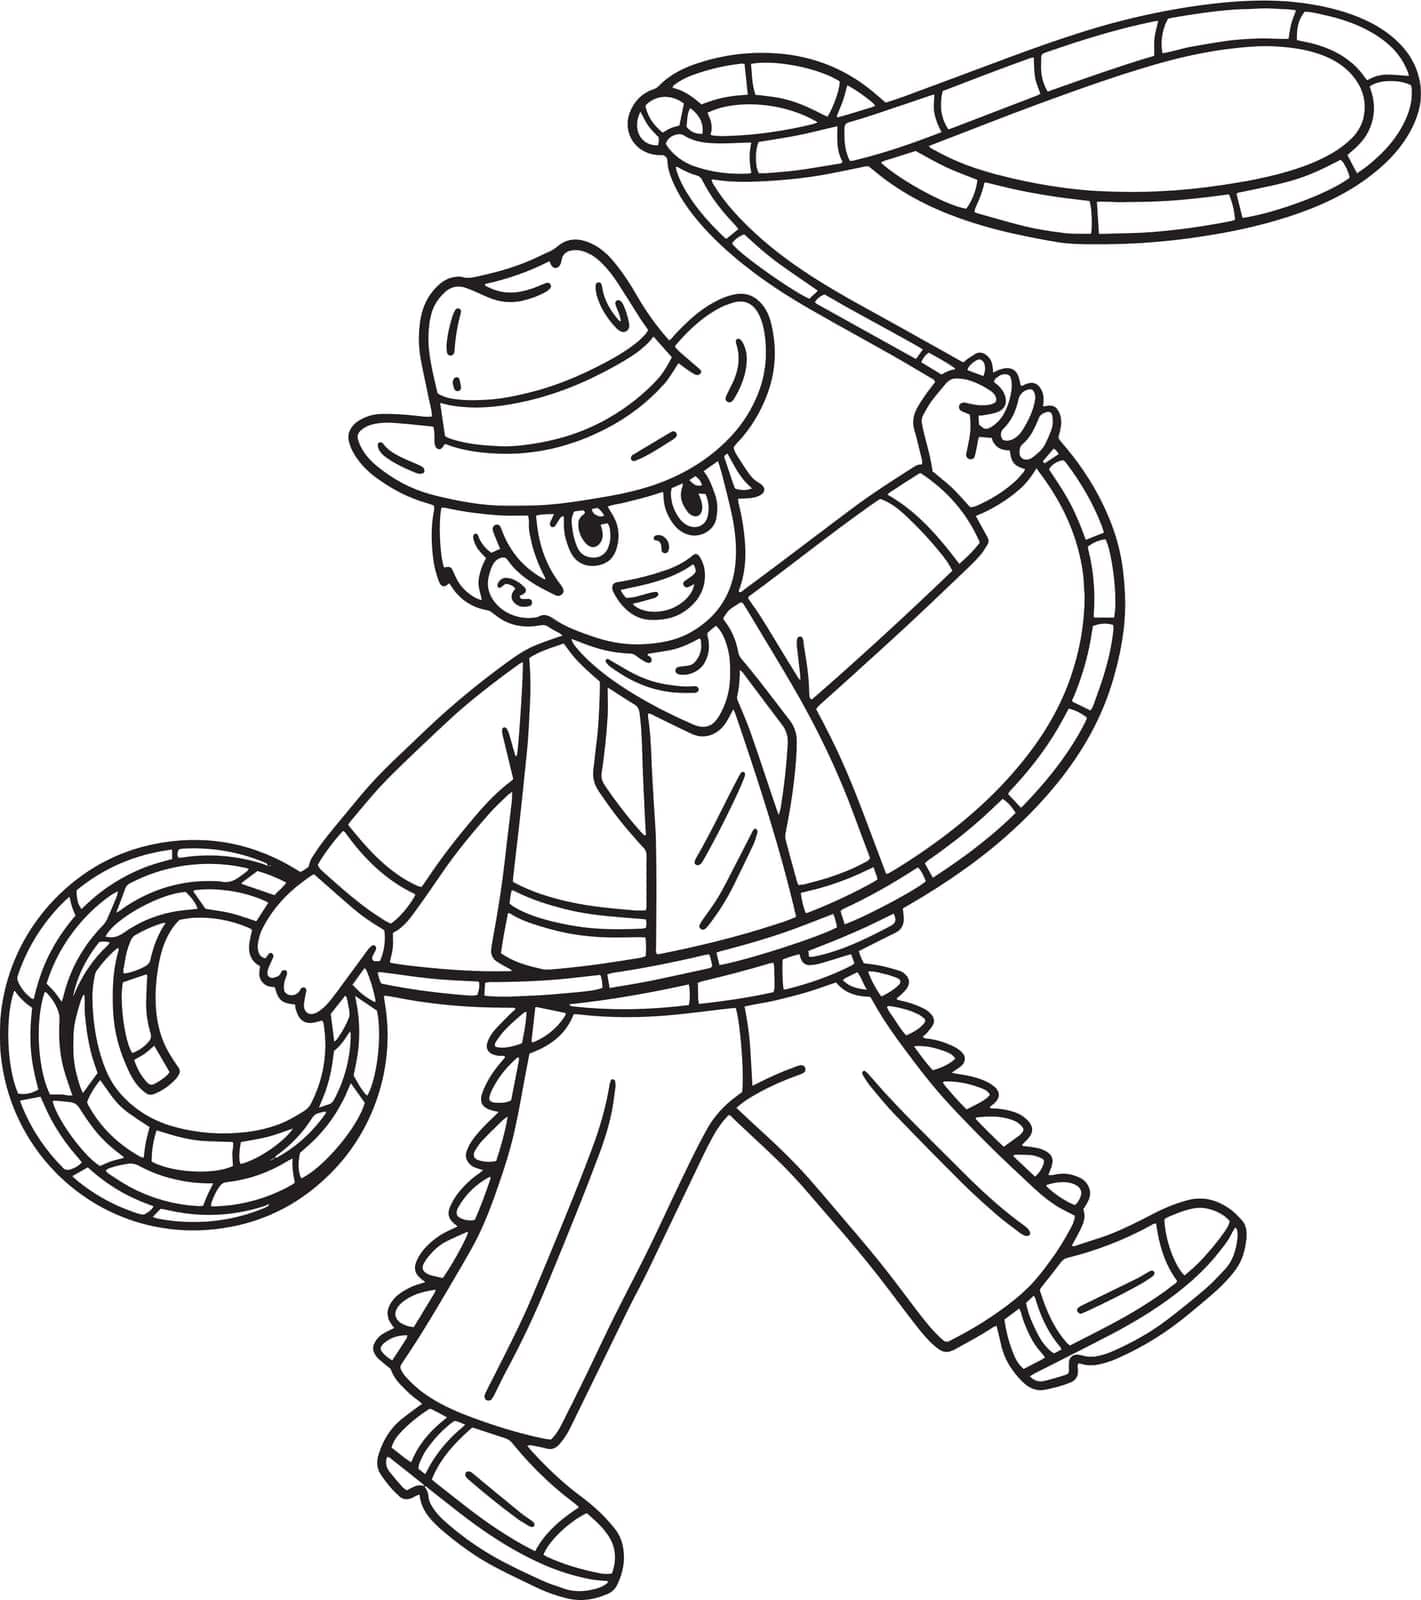 Cowboy with Lasso Isolated Coloring Page for Kids by abbydesign